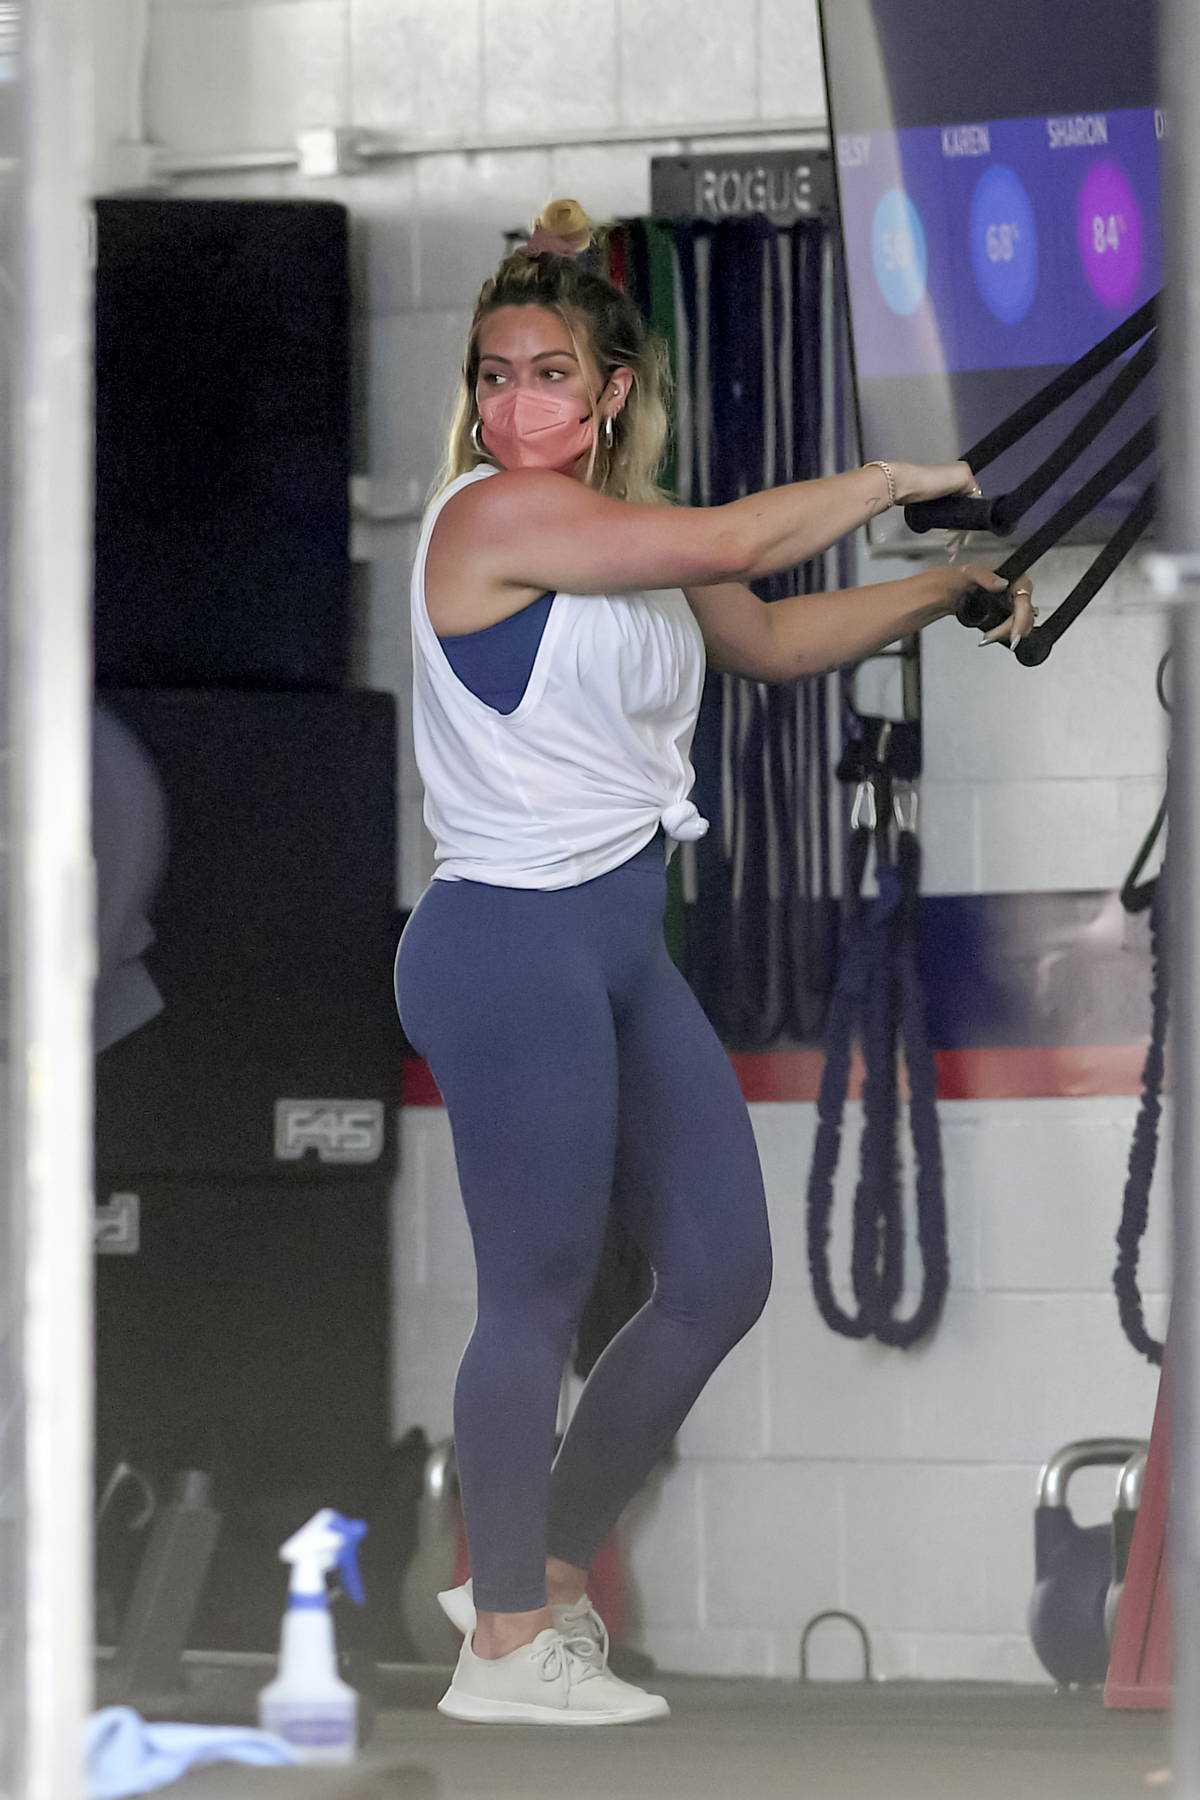 Hilary Duff Flaunts Her Curves In A Workout Top And Leggings During A Workout Session At A Gym